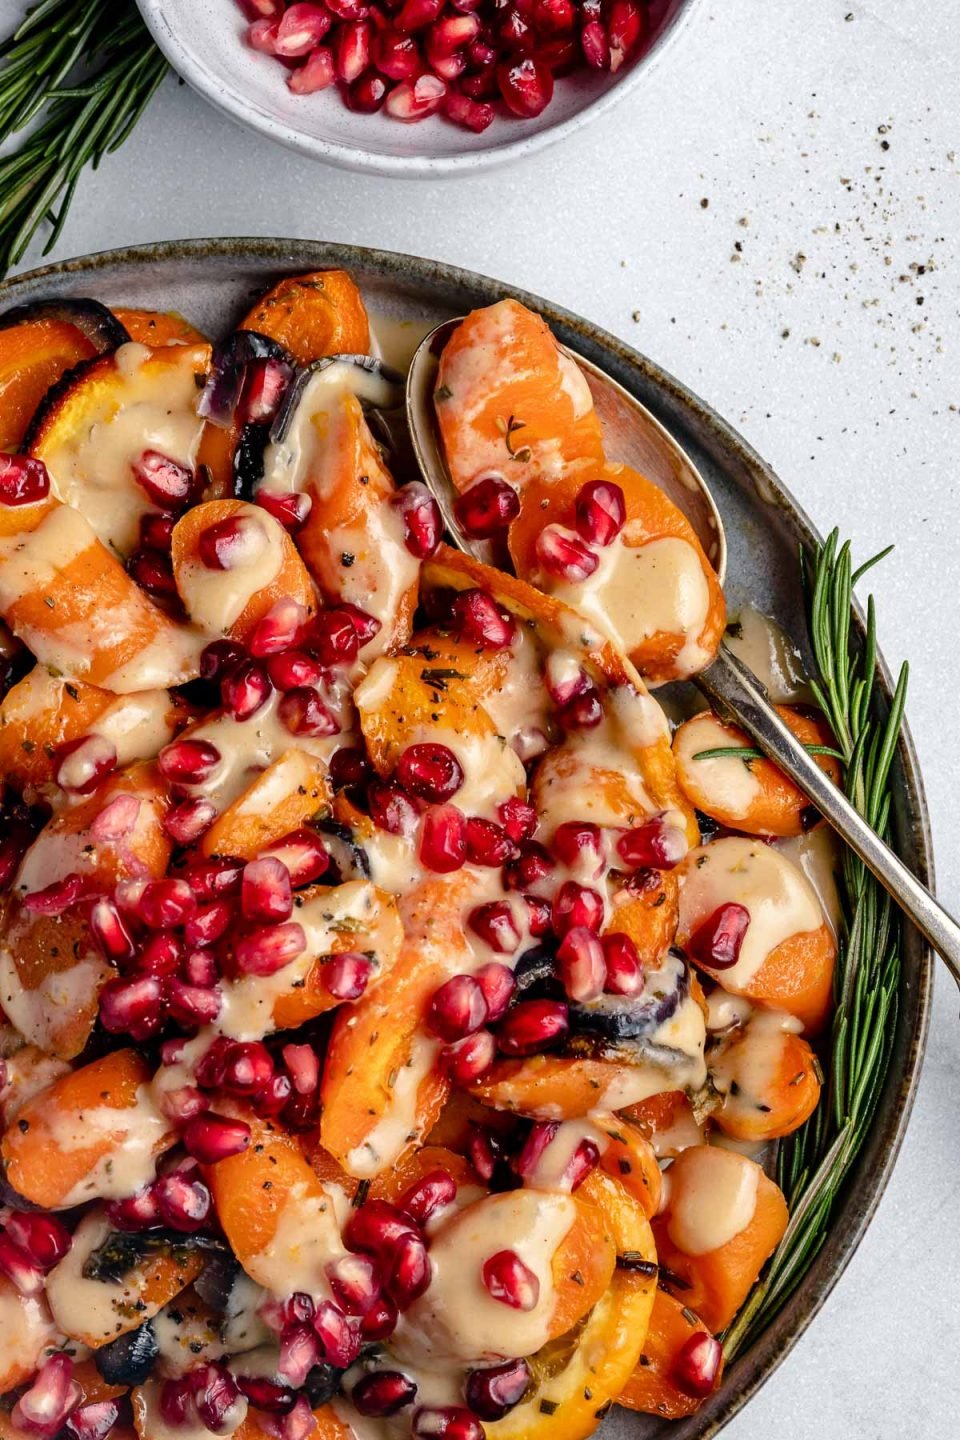 Perfectly roasted maple glazed carrots, red onions, and orange slices in a large gray serving platter drizzled with an orange tahini sauce and sprinkled with pomegranate arils and with a sprig of fresh rosemary on the side. A silver spoon is nestled into the dish and rests on the platter. The platter sits on top of a light gray surface with a light gray bowl of pomegranate arils in the background and another sprig of fresh rosemary and cracked black pepper surrounding the bowl.